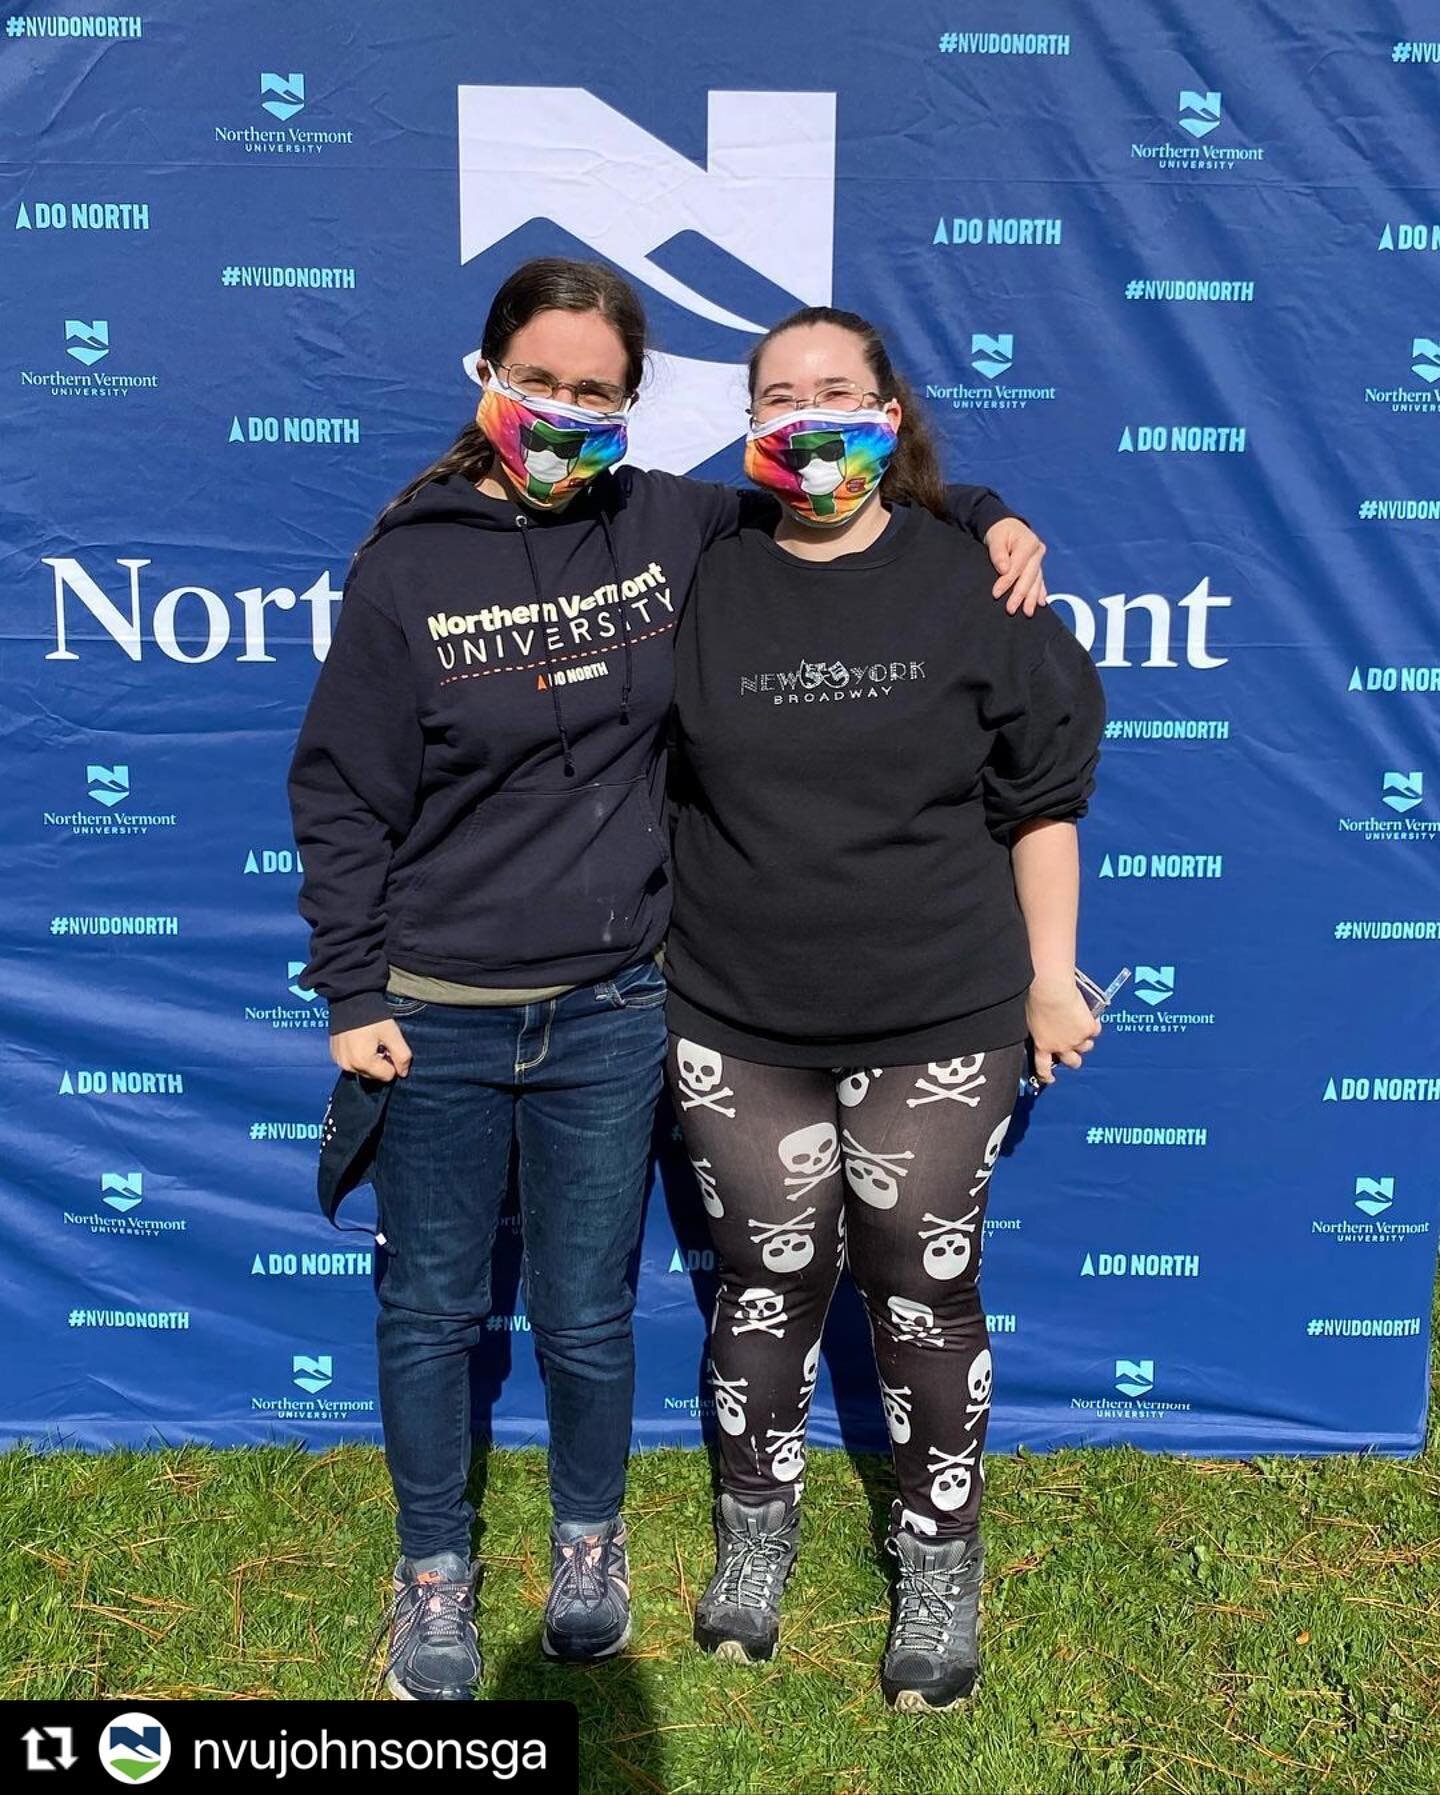 ICYMI: @nvujohnsonsga 
・・・
Repost: Come by the tent on the quad to make a mask and get your free mask for Vermont Mask Day! #masks4missions #vtmaskday #keepvtsafe #wearingiscaringvt